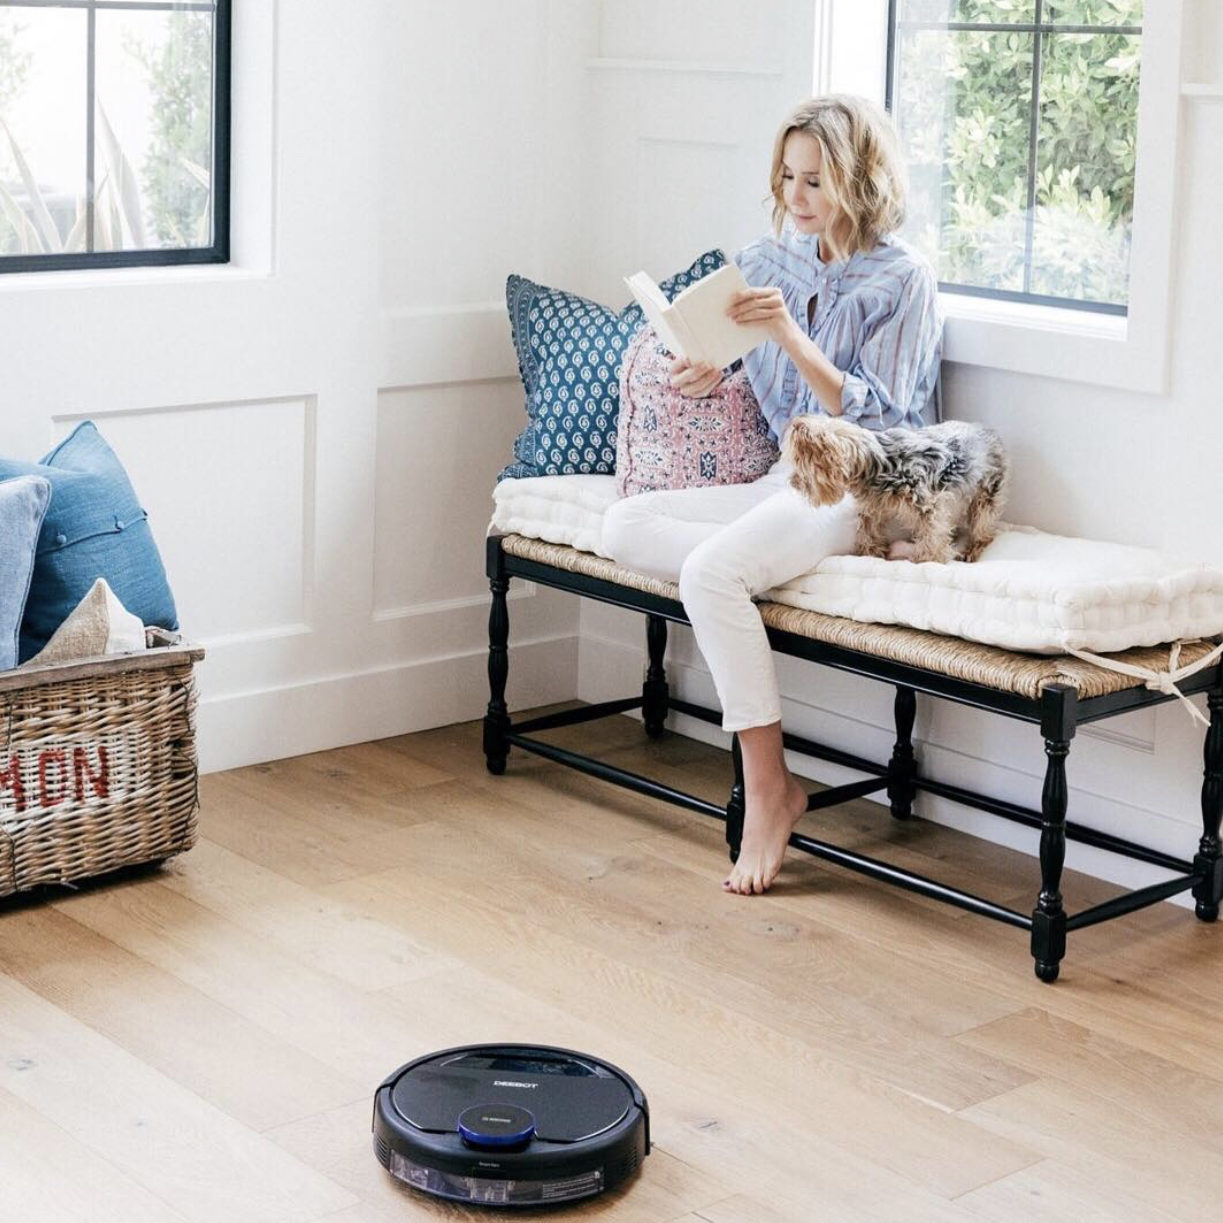 Woman sitting on bench reading a book with a small dog next to her, while a robotic vacuum cleans the floor